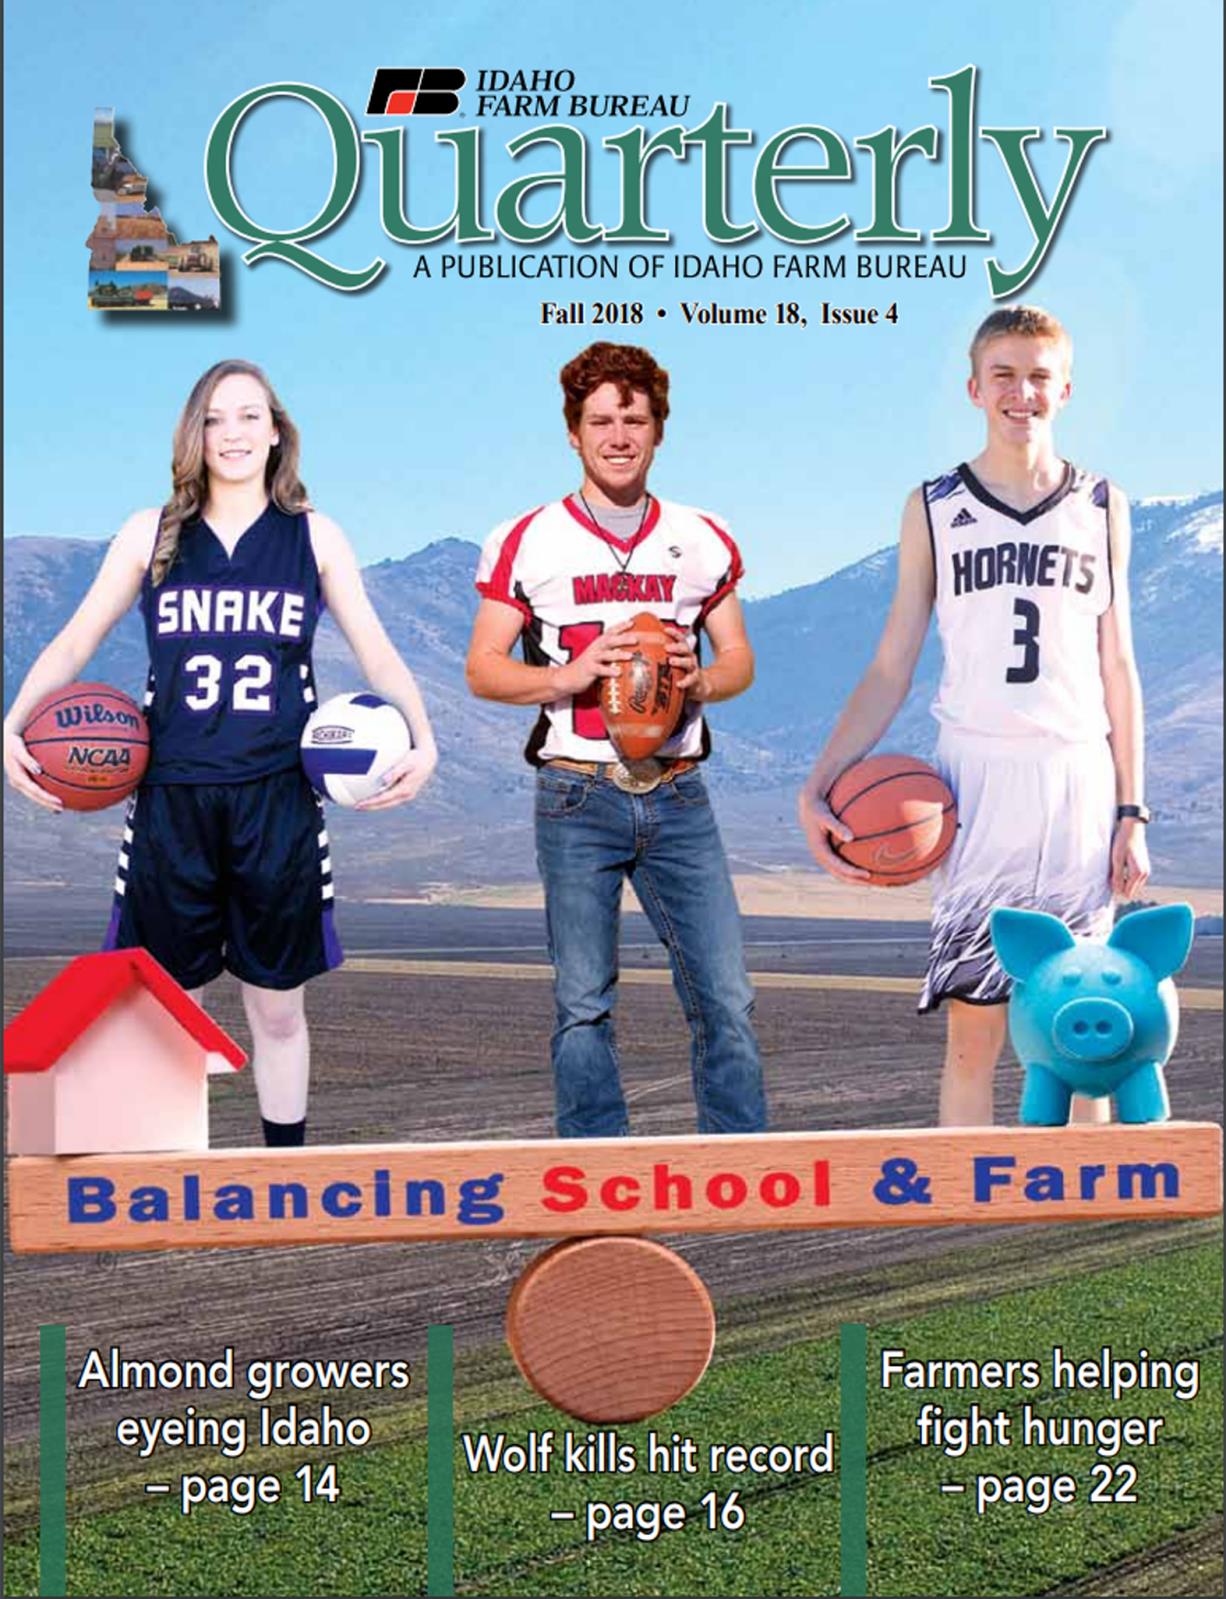 Farm kids speak about how they balance their farm duties with their high school sports commitments.